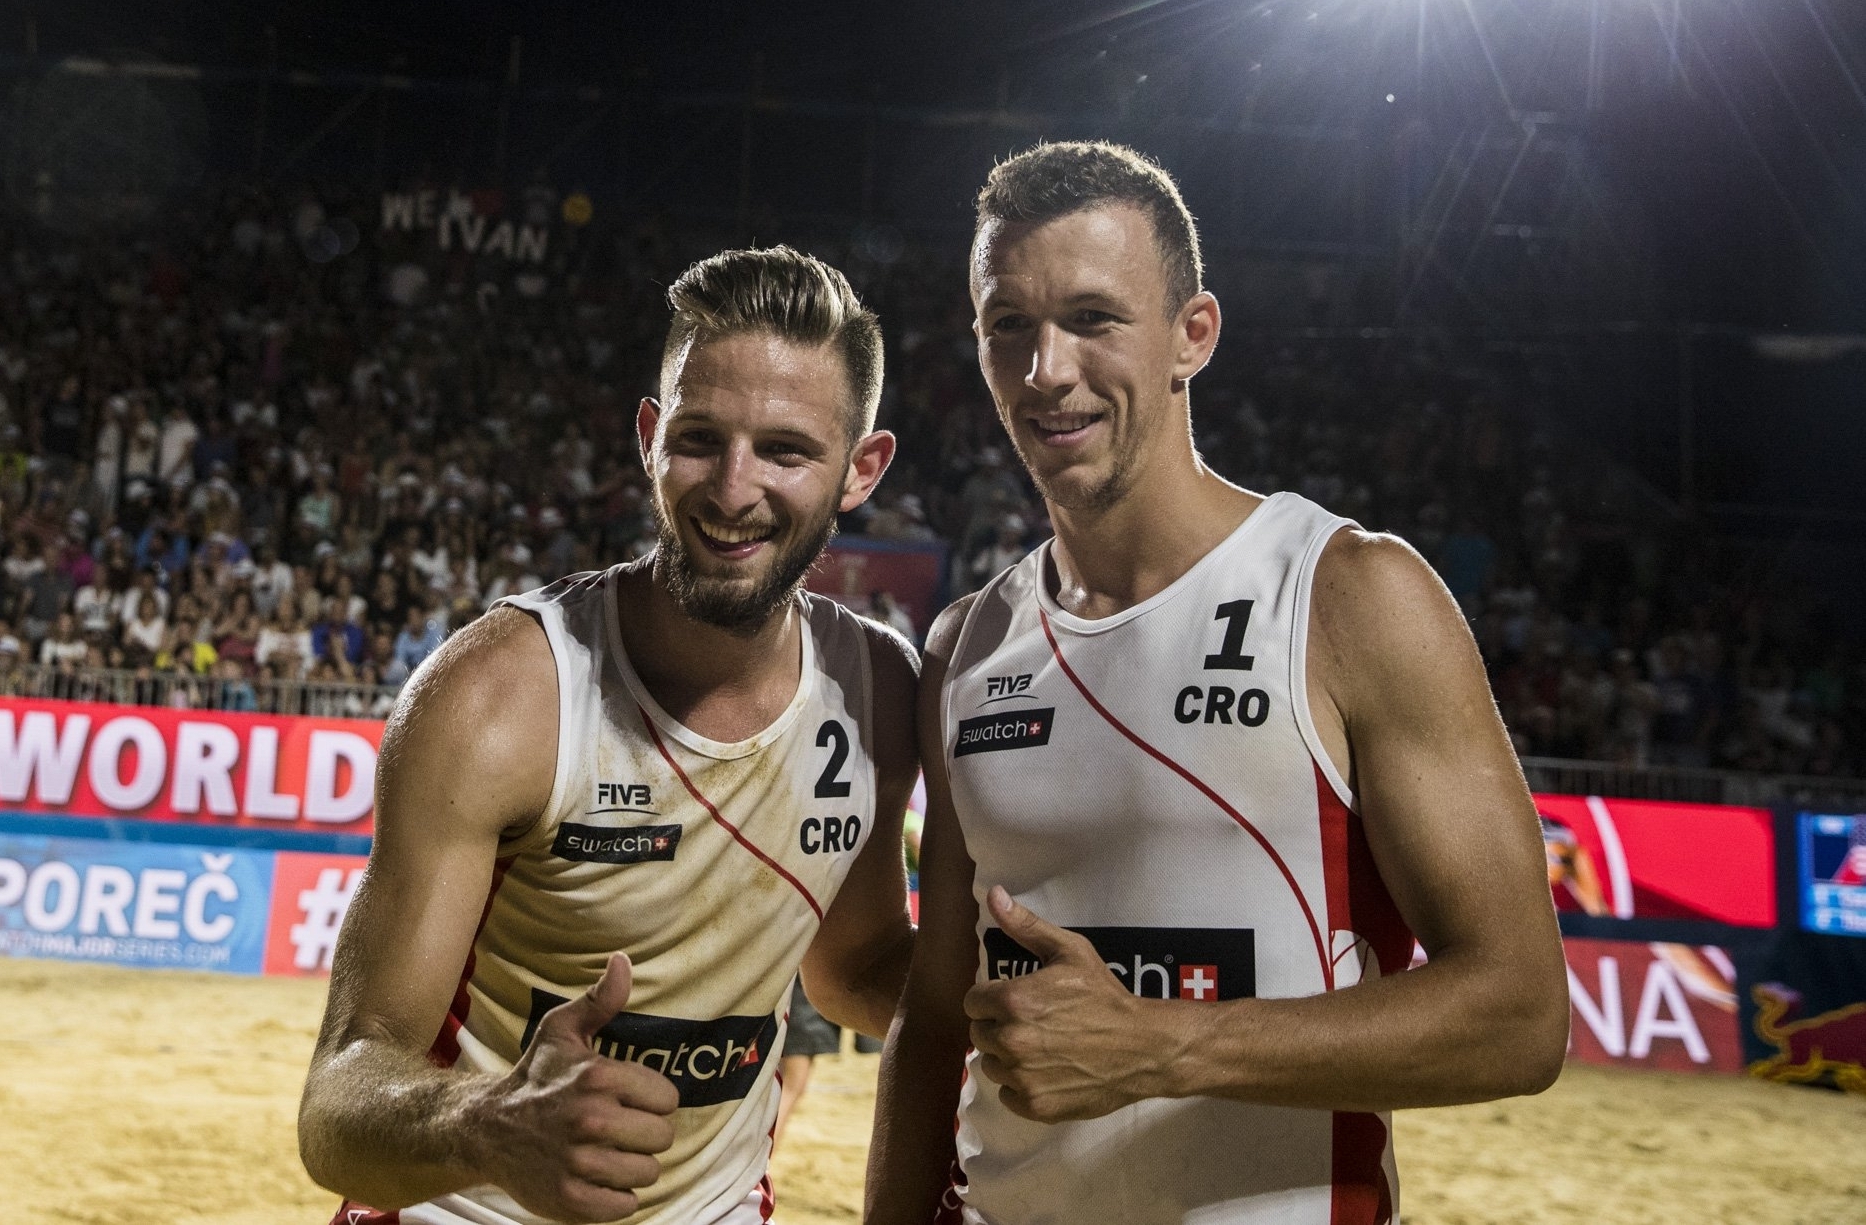 Ivan Perišić and partner Niksa Dell’Orco give the thumbs up after the game. Photocredit: Samo Vidic.